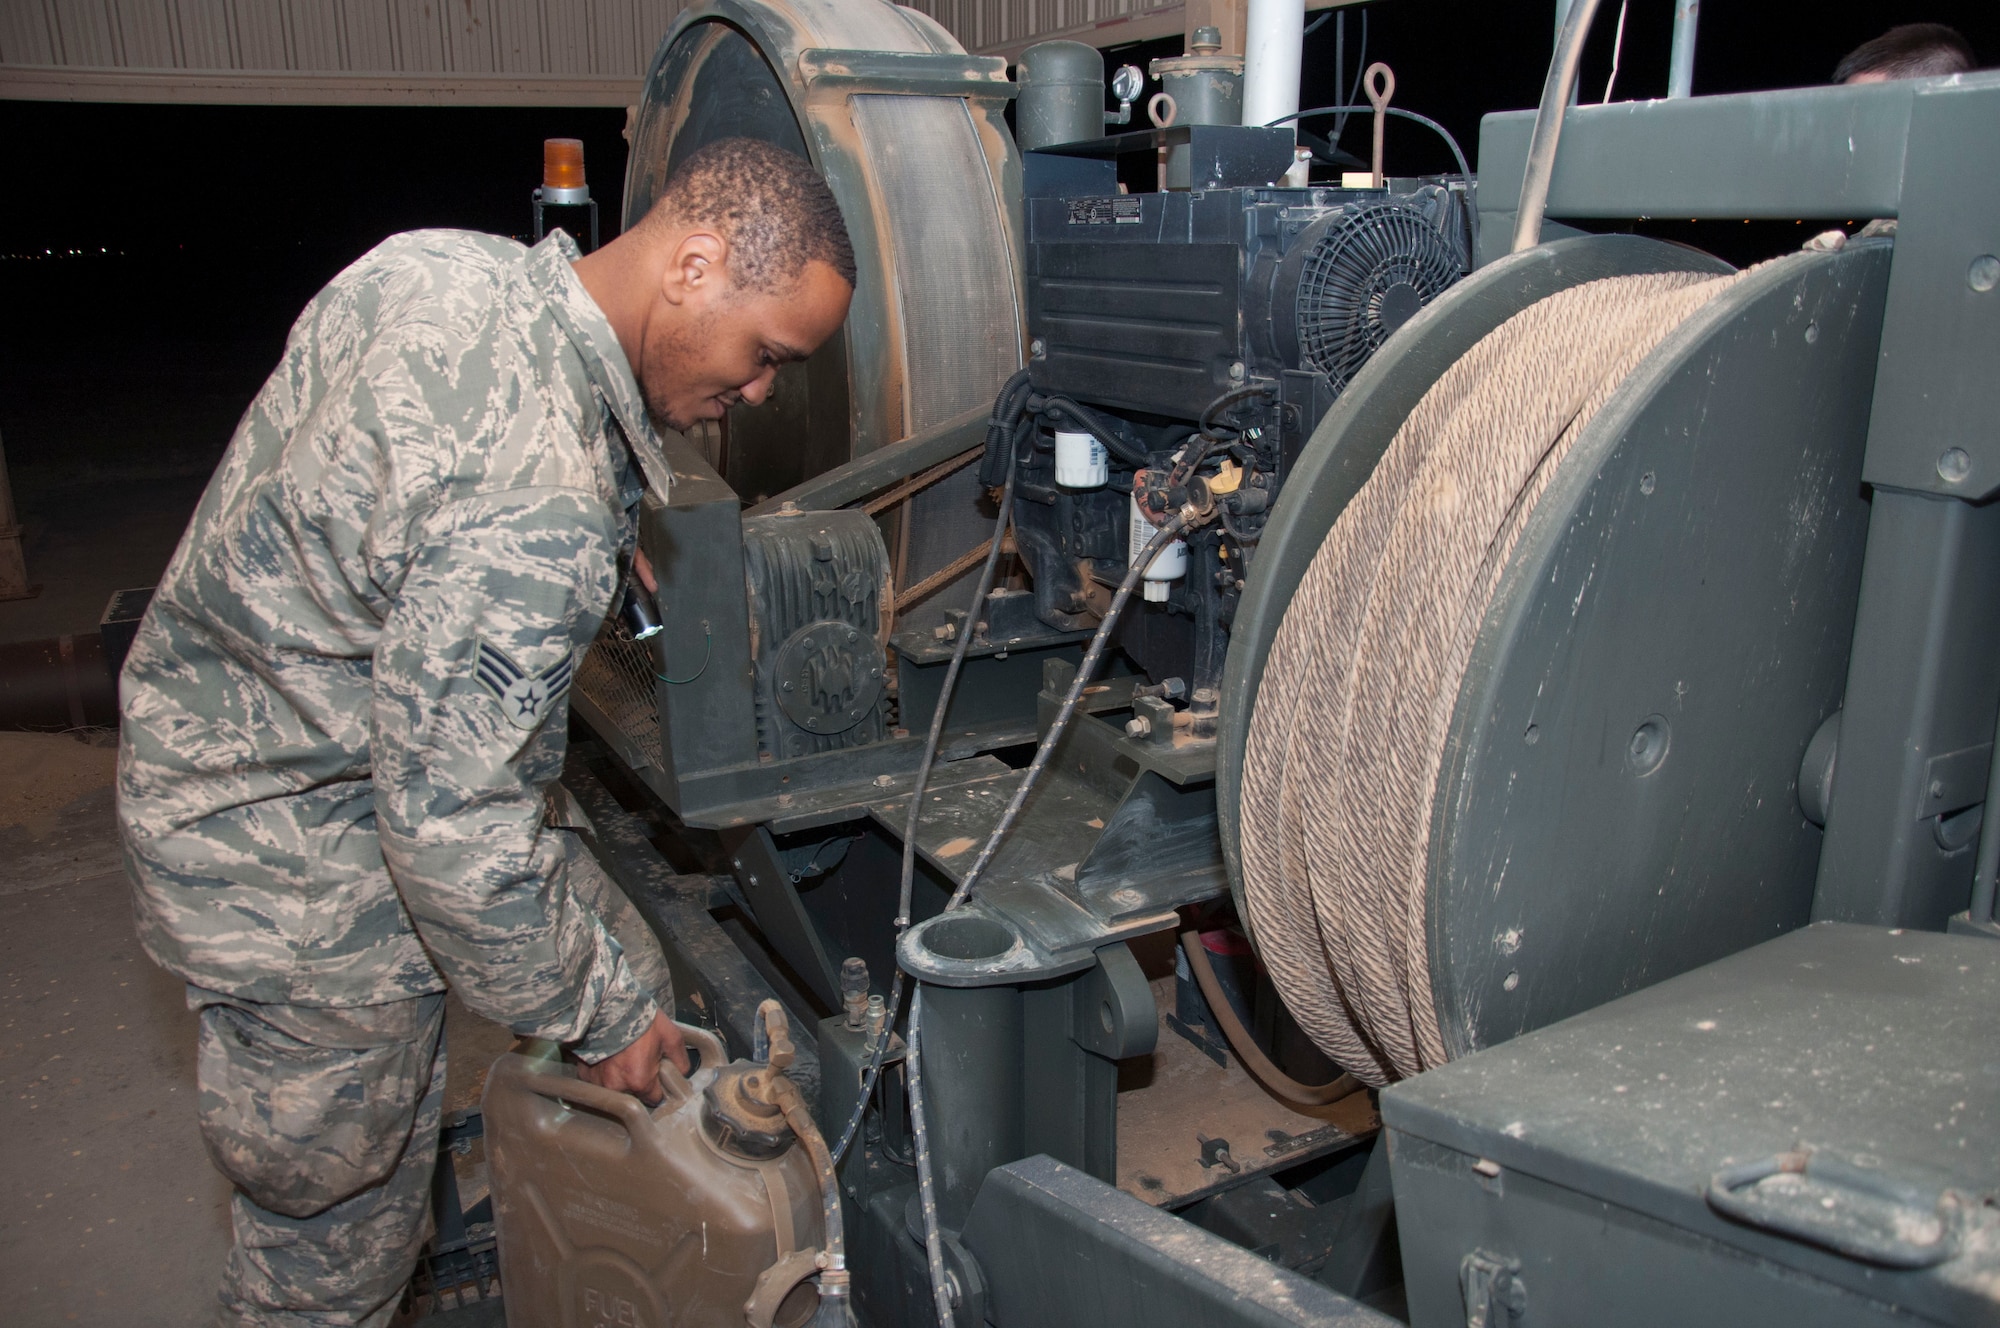 Senior Airman Quentin Palmore, a power production specialist assigned to the 386th Expeditionary Civil Engineer Squadron, conducts and inspection on a mobile aircraft arresting system at an undisclosed location in southwest Asia, June 24, 2017. A visual inspection is performed on these units daily. (U.S. Air Force Photo/Master Sgt. Eric M. Sharman)